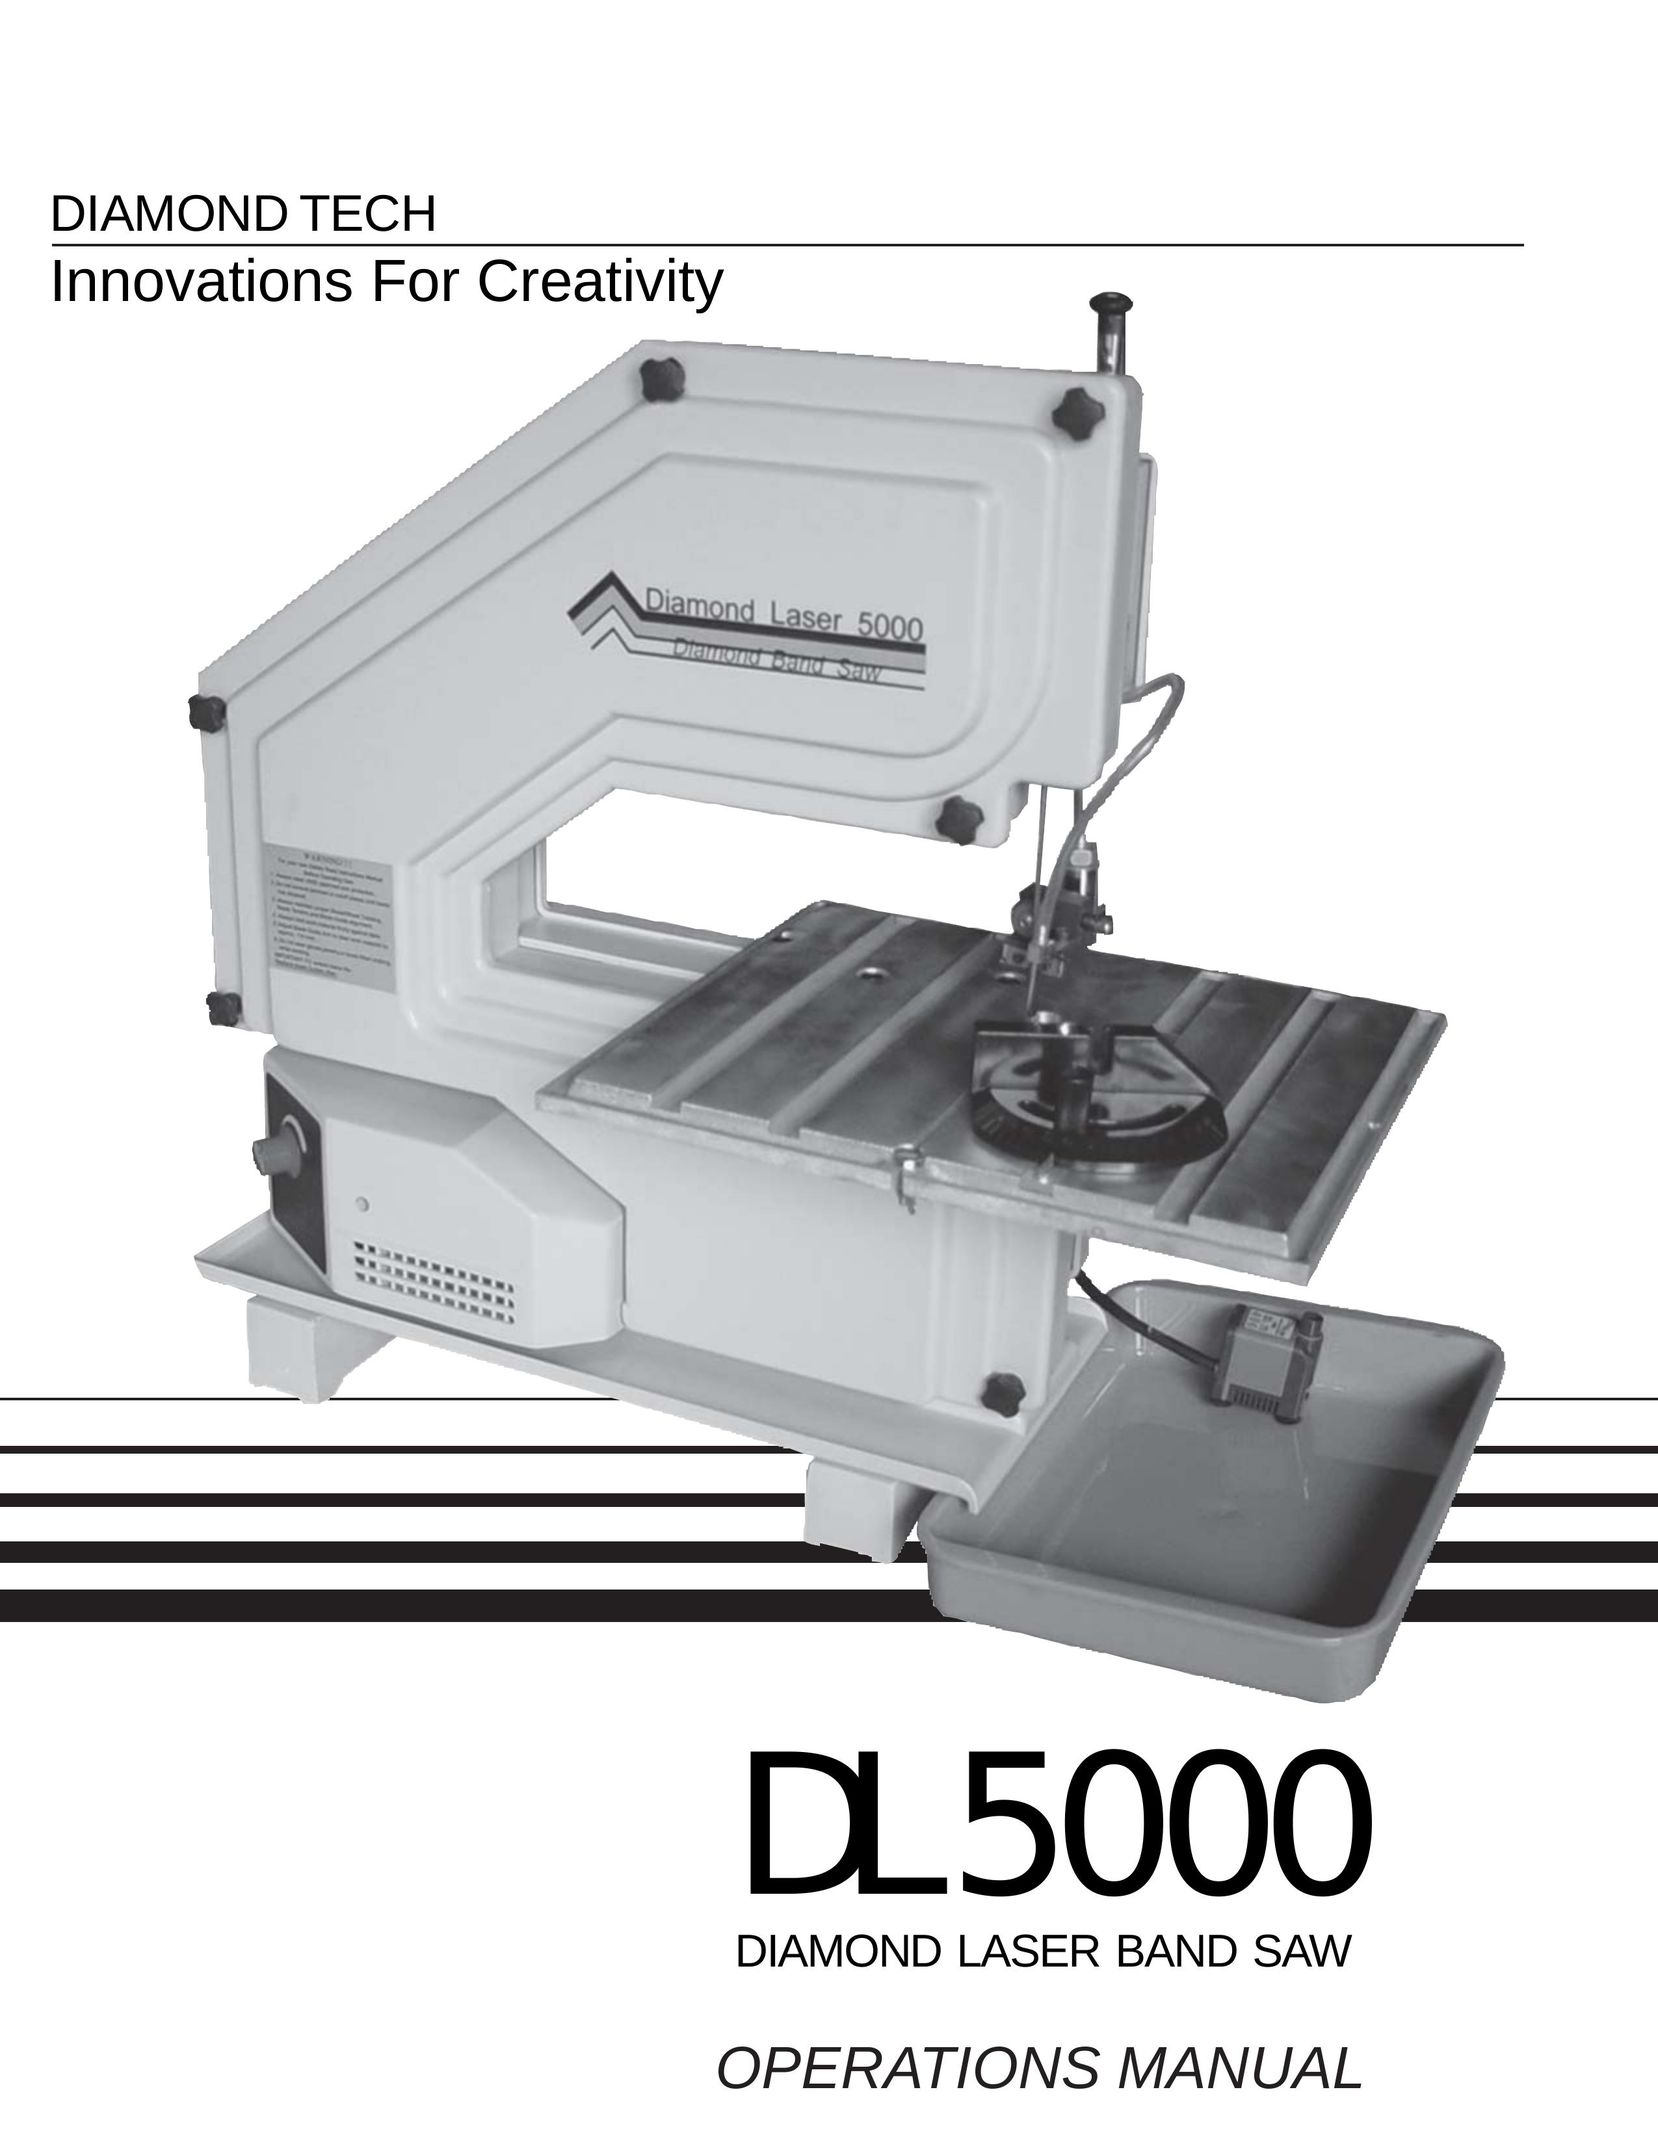 Diamond Power Products DL 5000 Saw User Manual (Page 1)